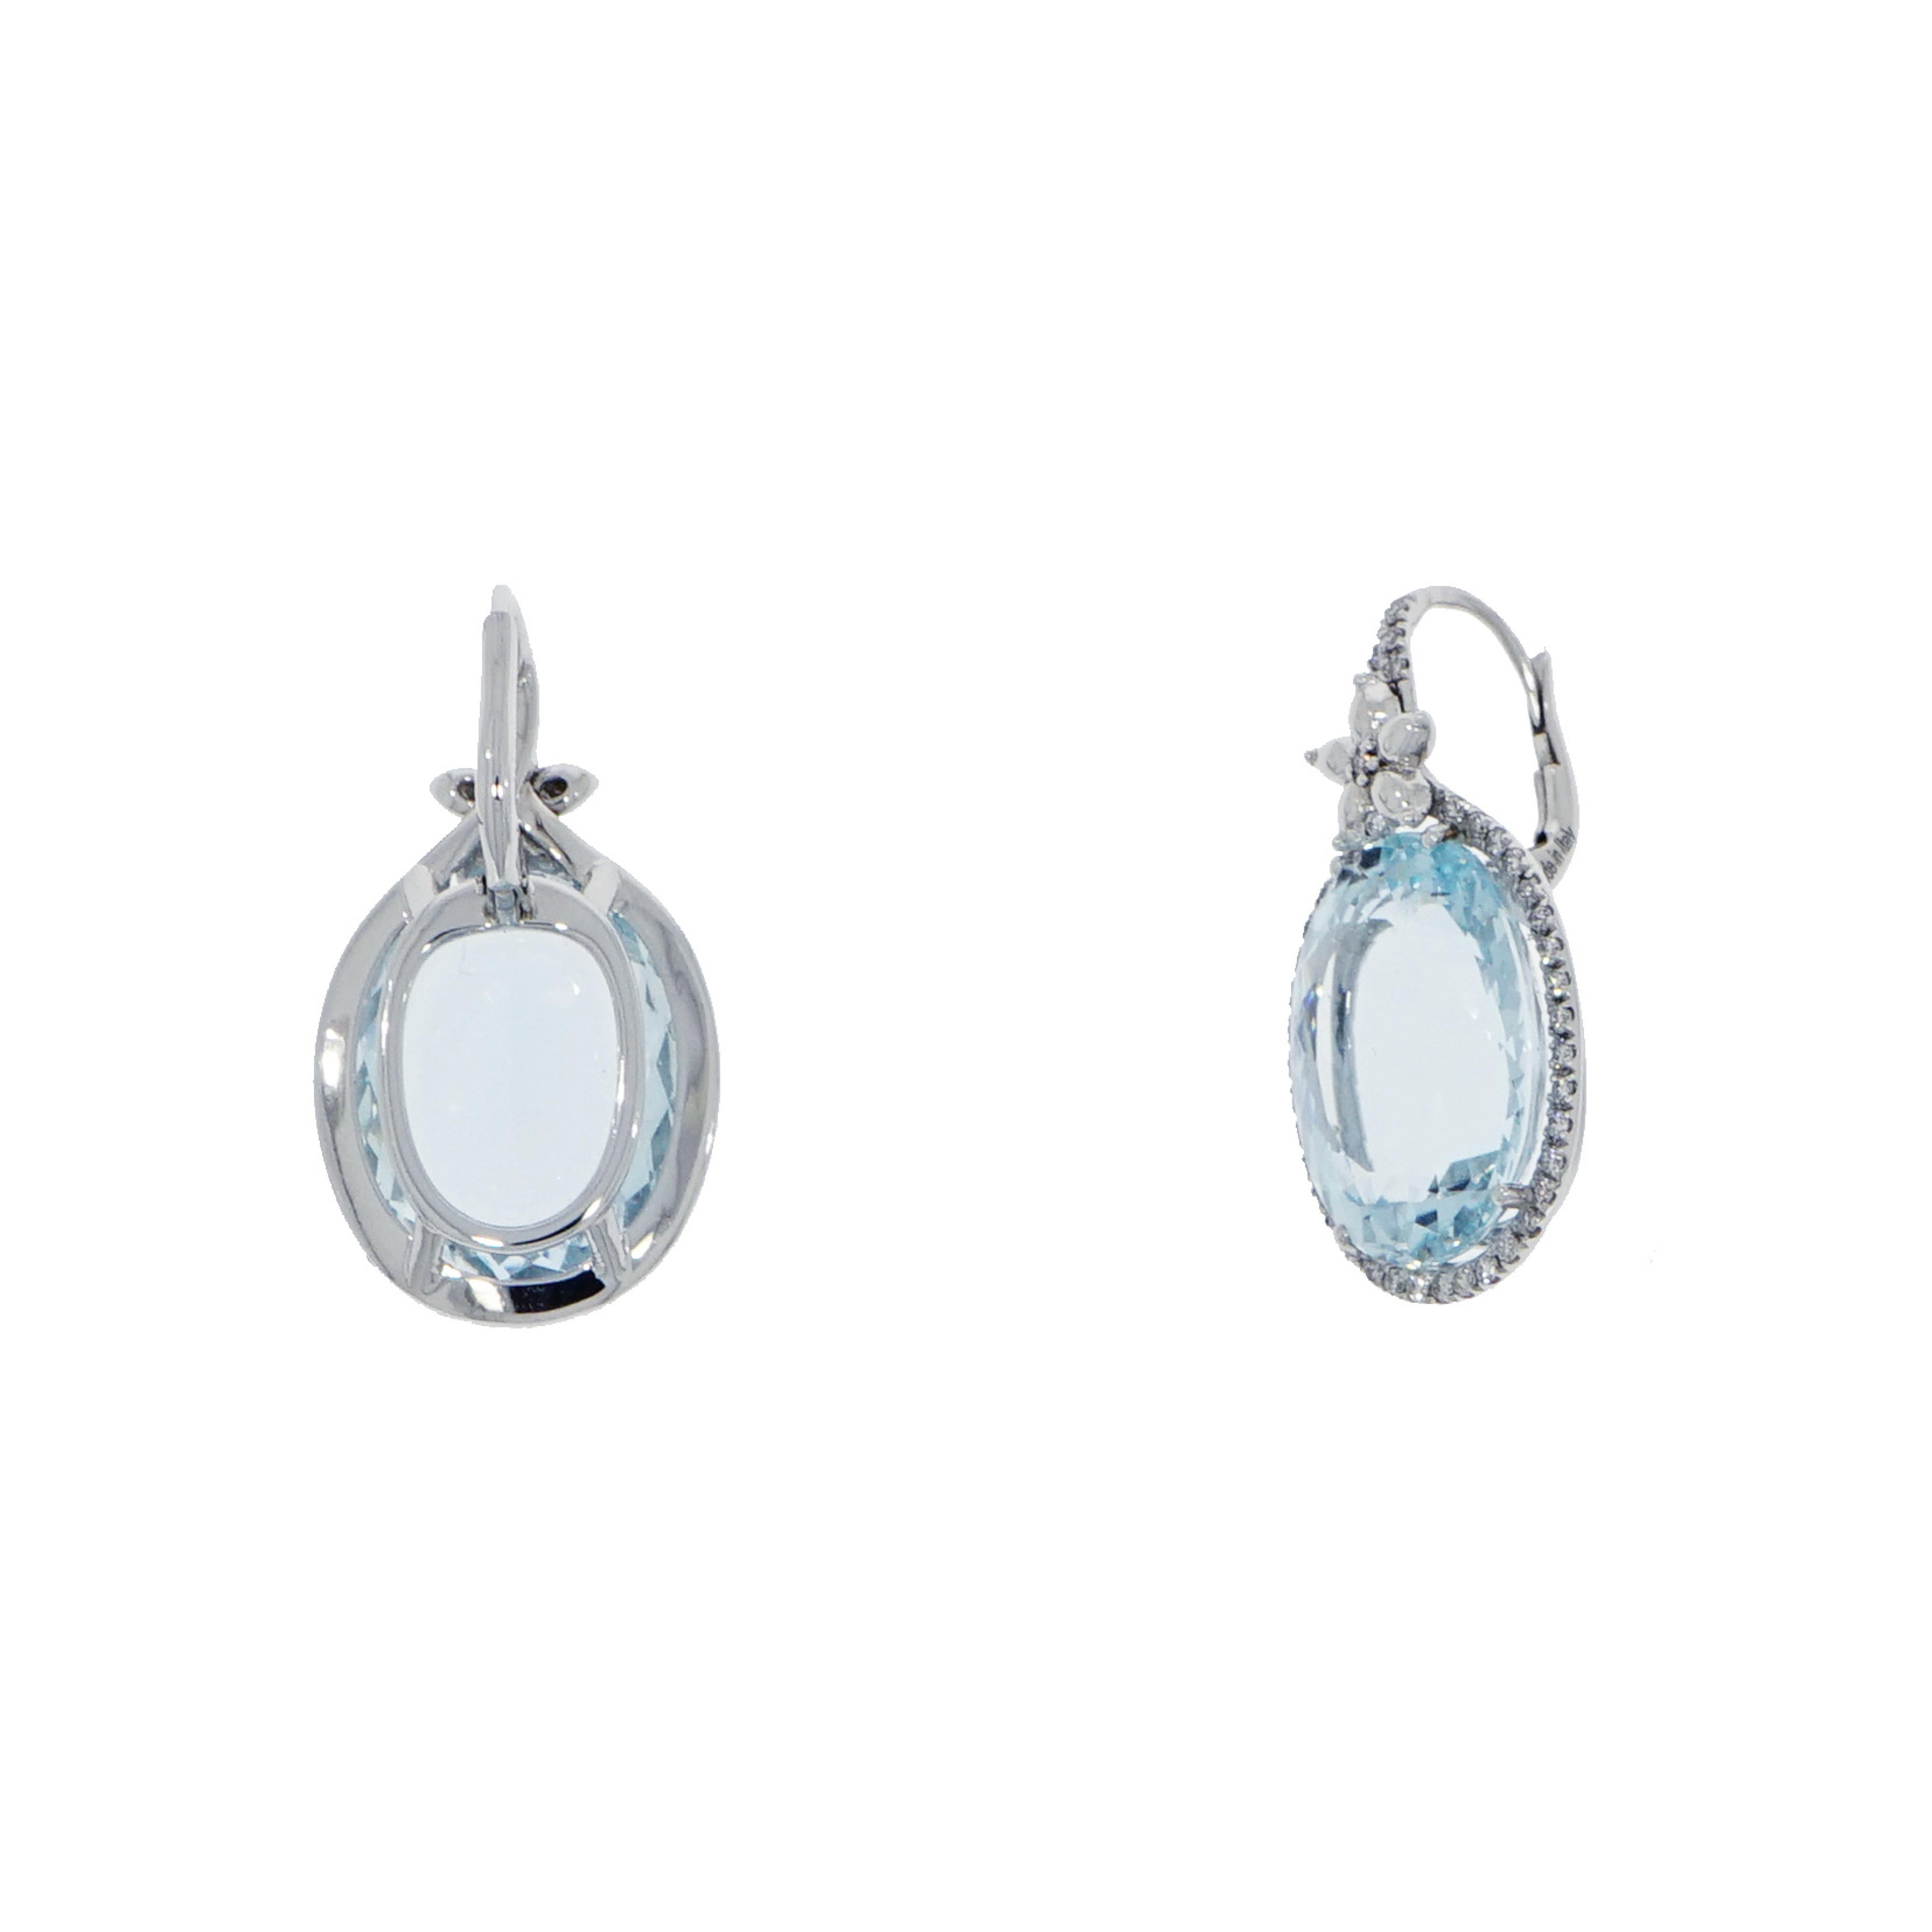 Aquamarine is an incredibly unique gemstone that's been slowly trending up. It's shimmery and has a soft color, which makes it somewhat of a neutral. 
Pairing it with diamonds this 25.04 carats total of oval Aquamarine will totally blow you